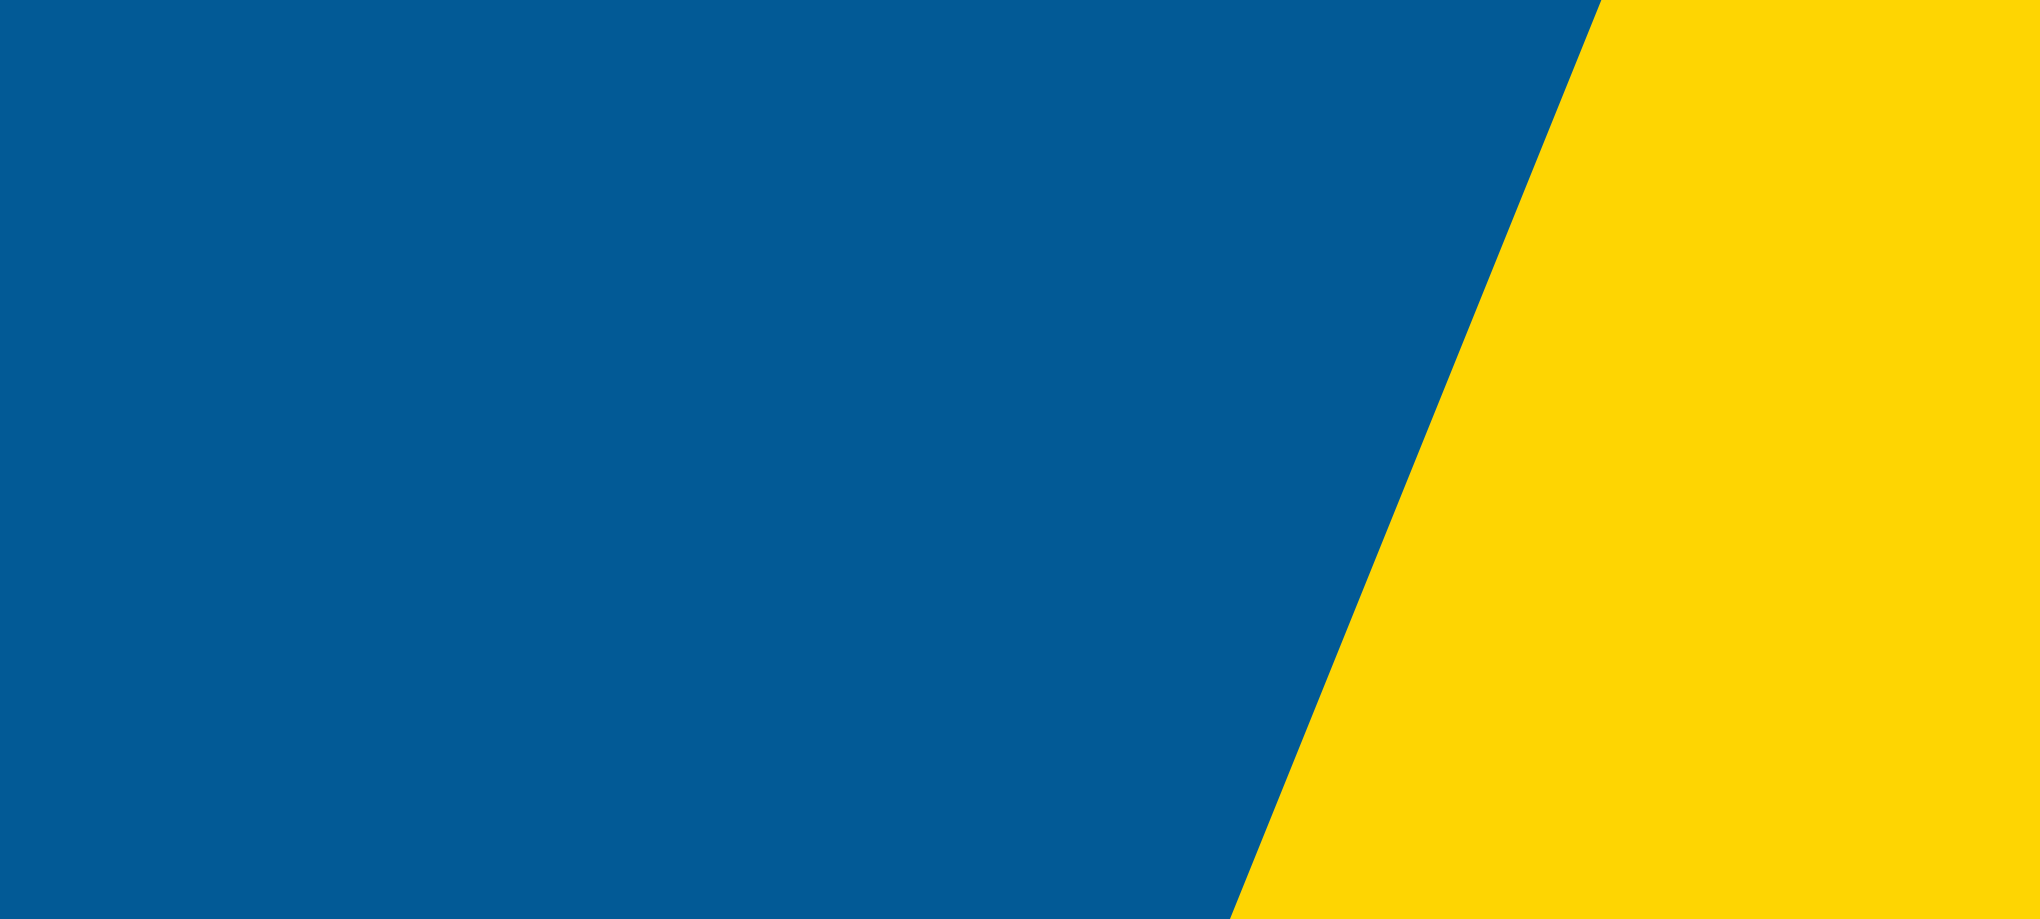 blue yellow section 3